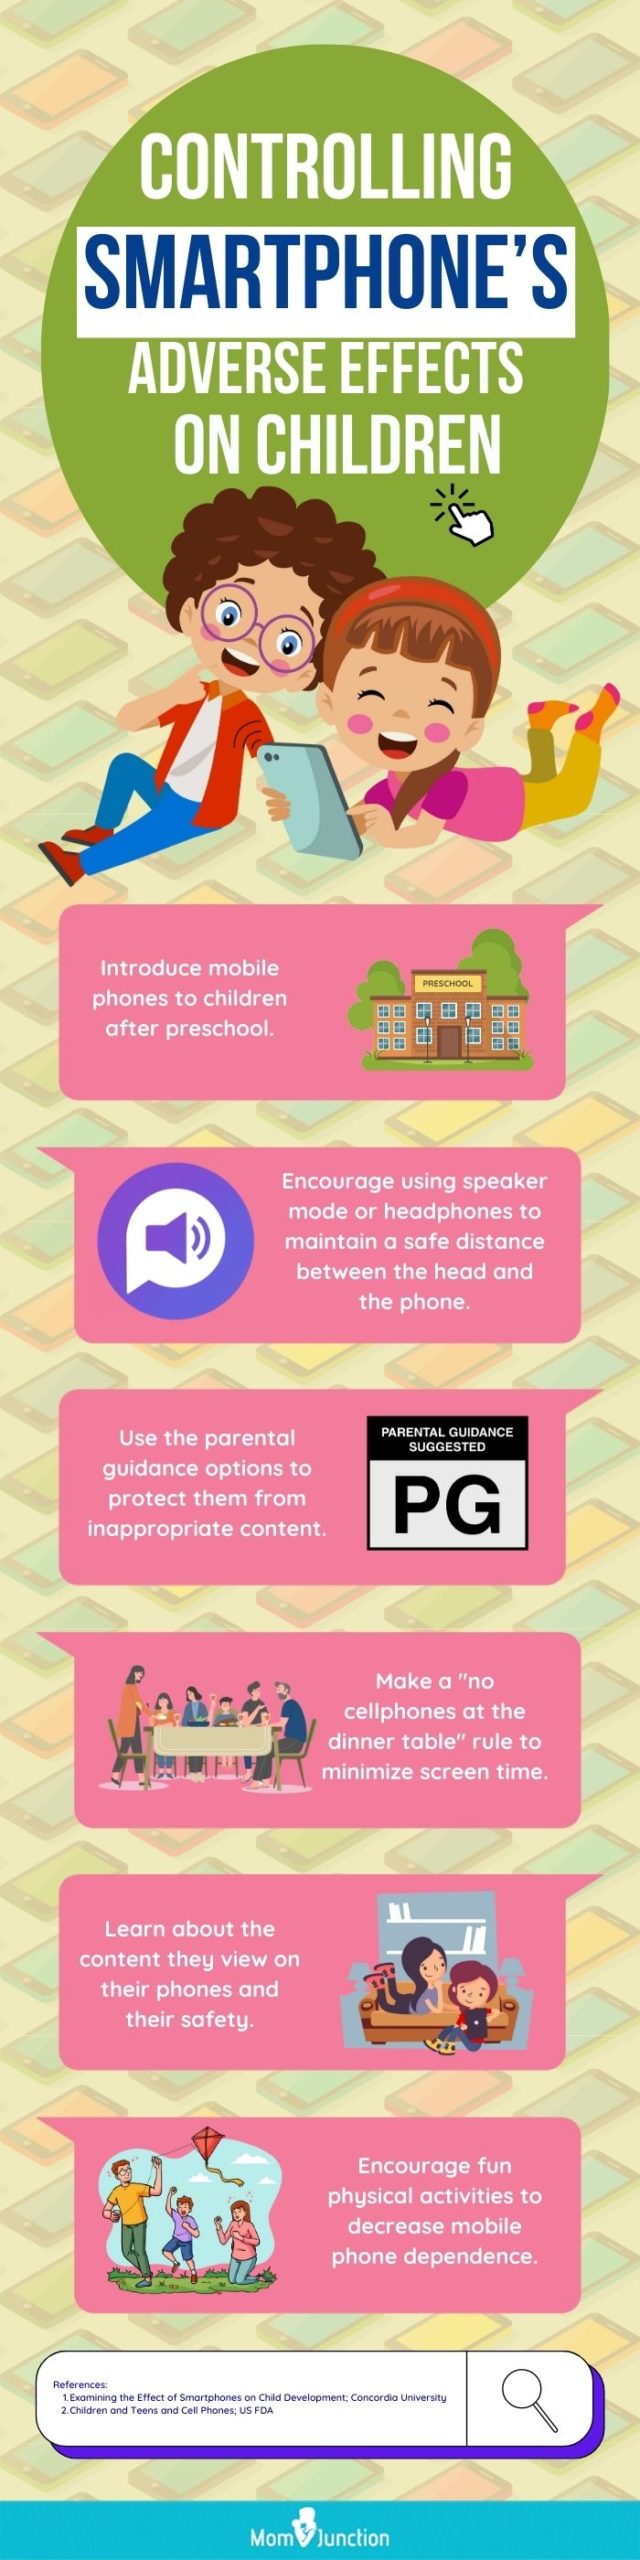 controlling smartphone s adverse effects on children (infographic)